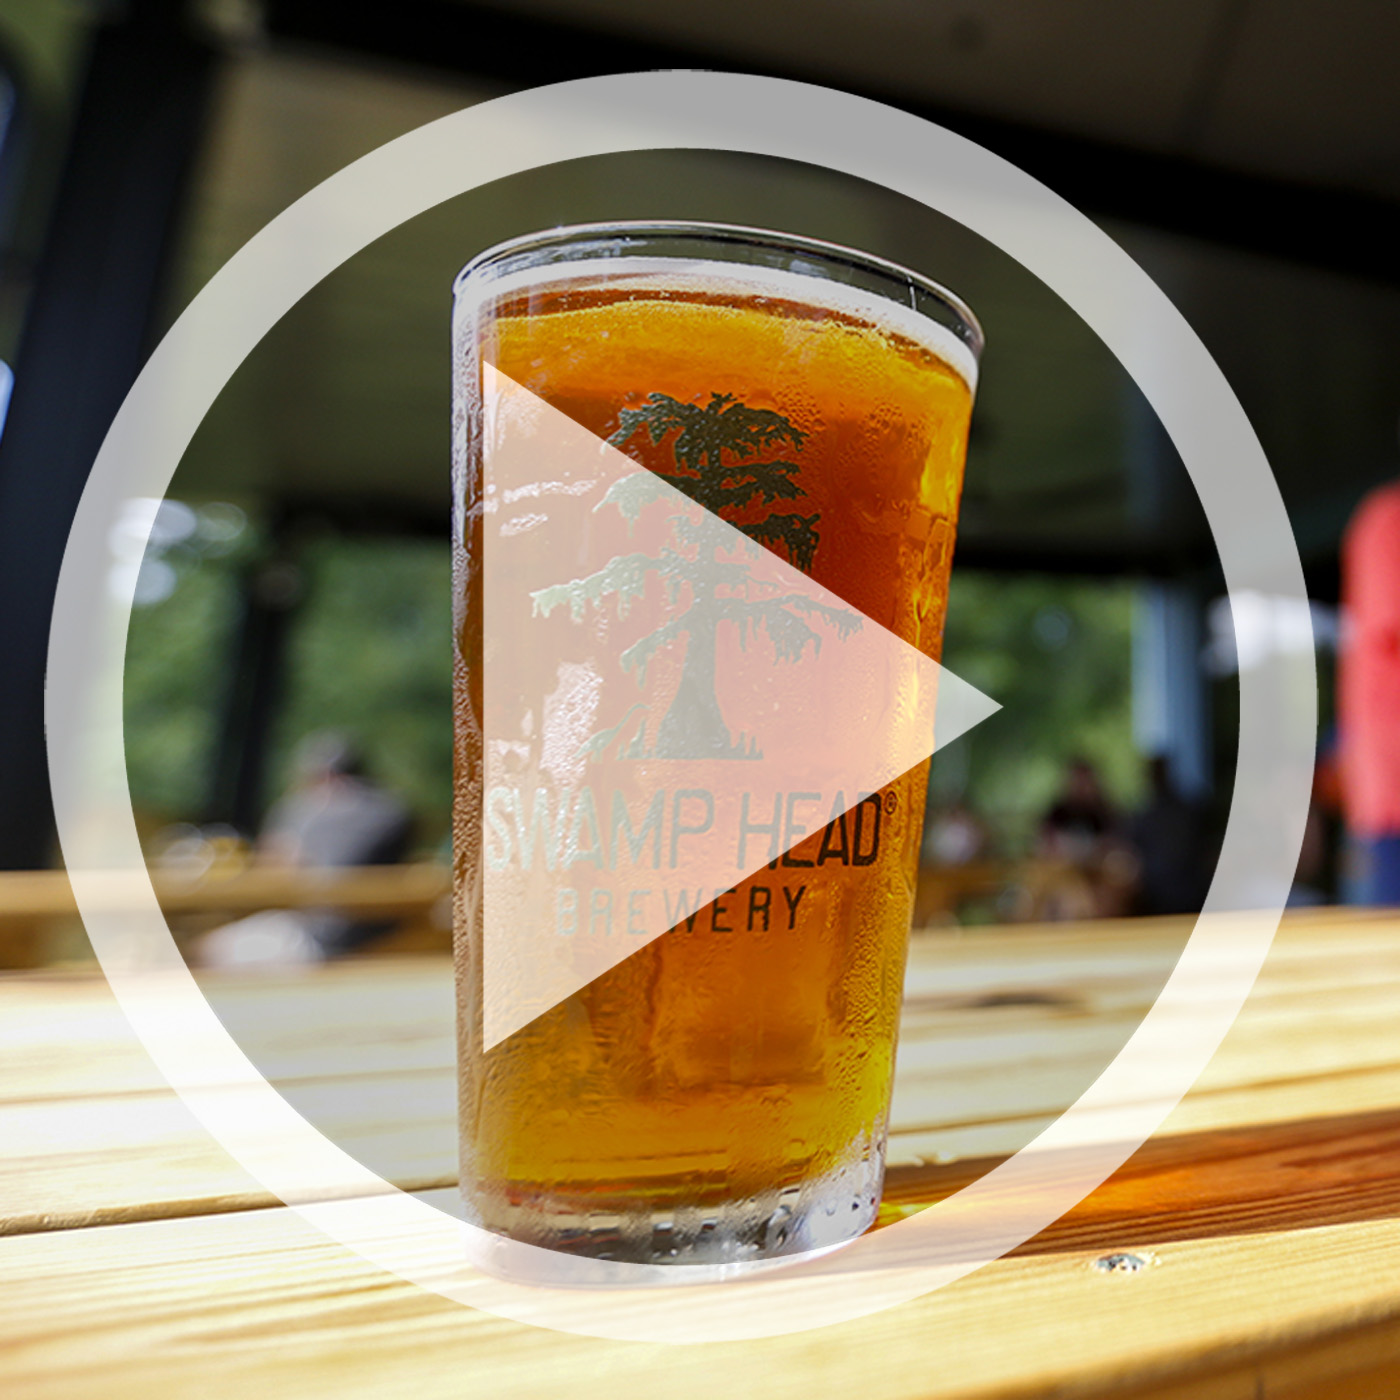 Whats the Gainesville beer brewing scene all about? Listen Up..